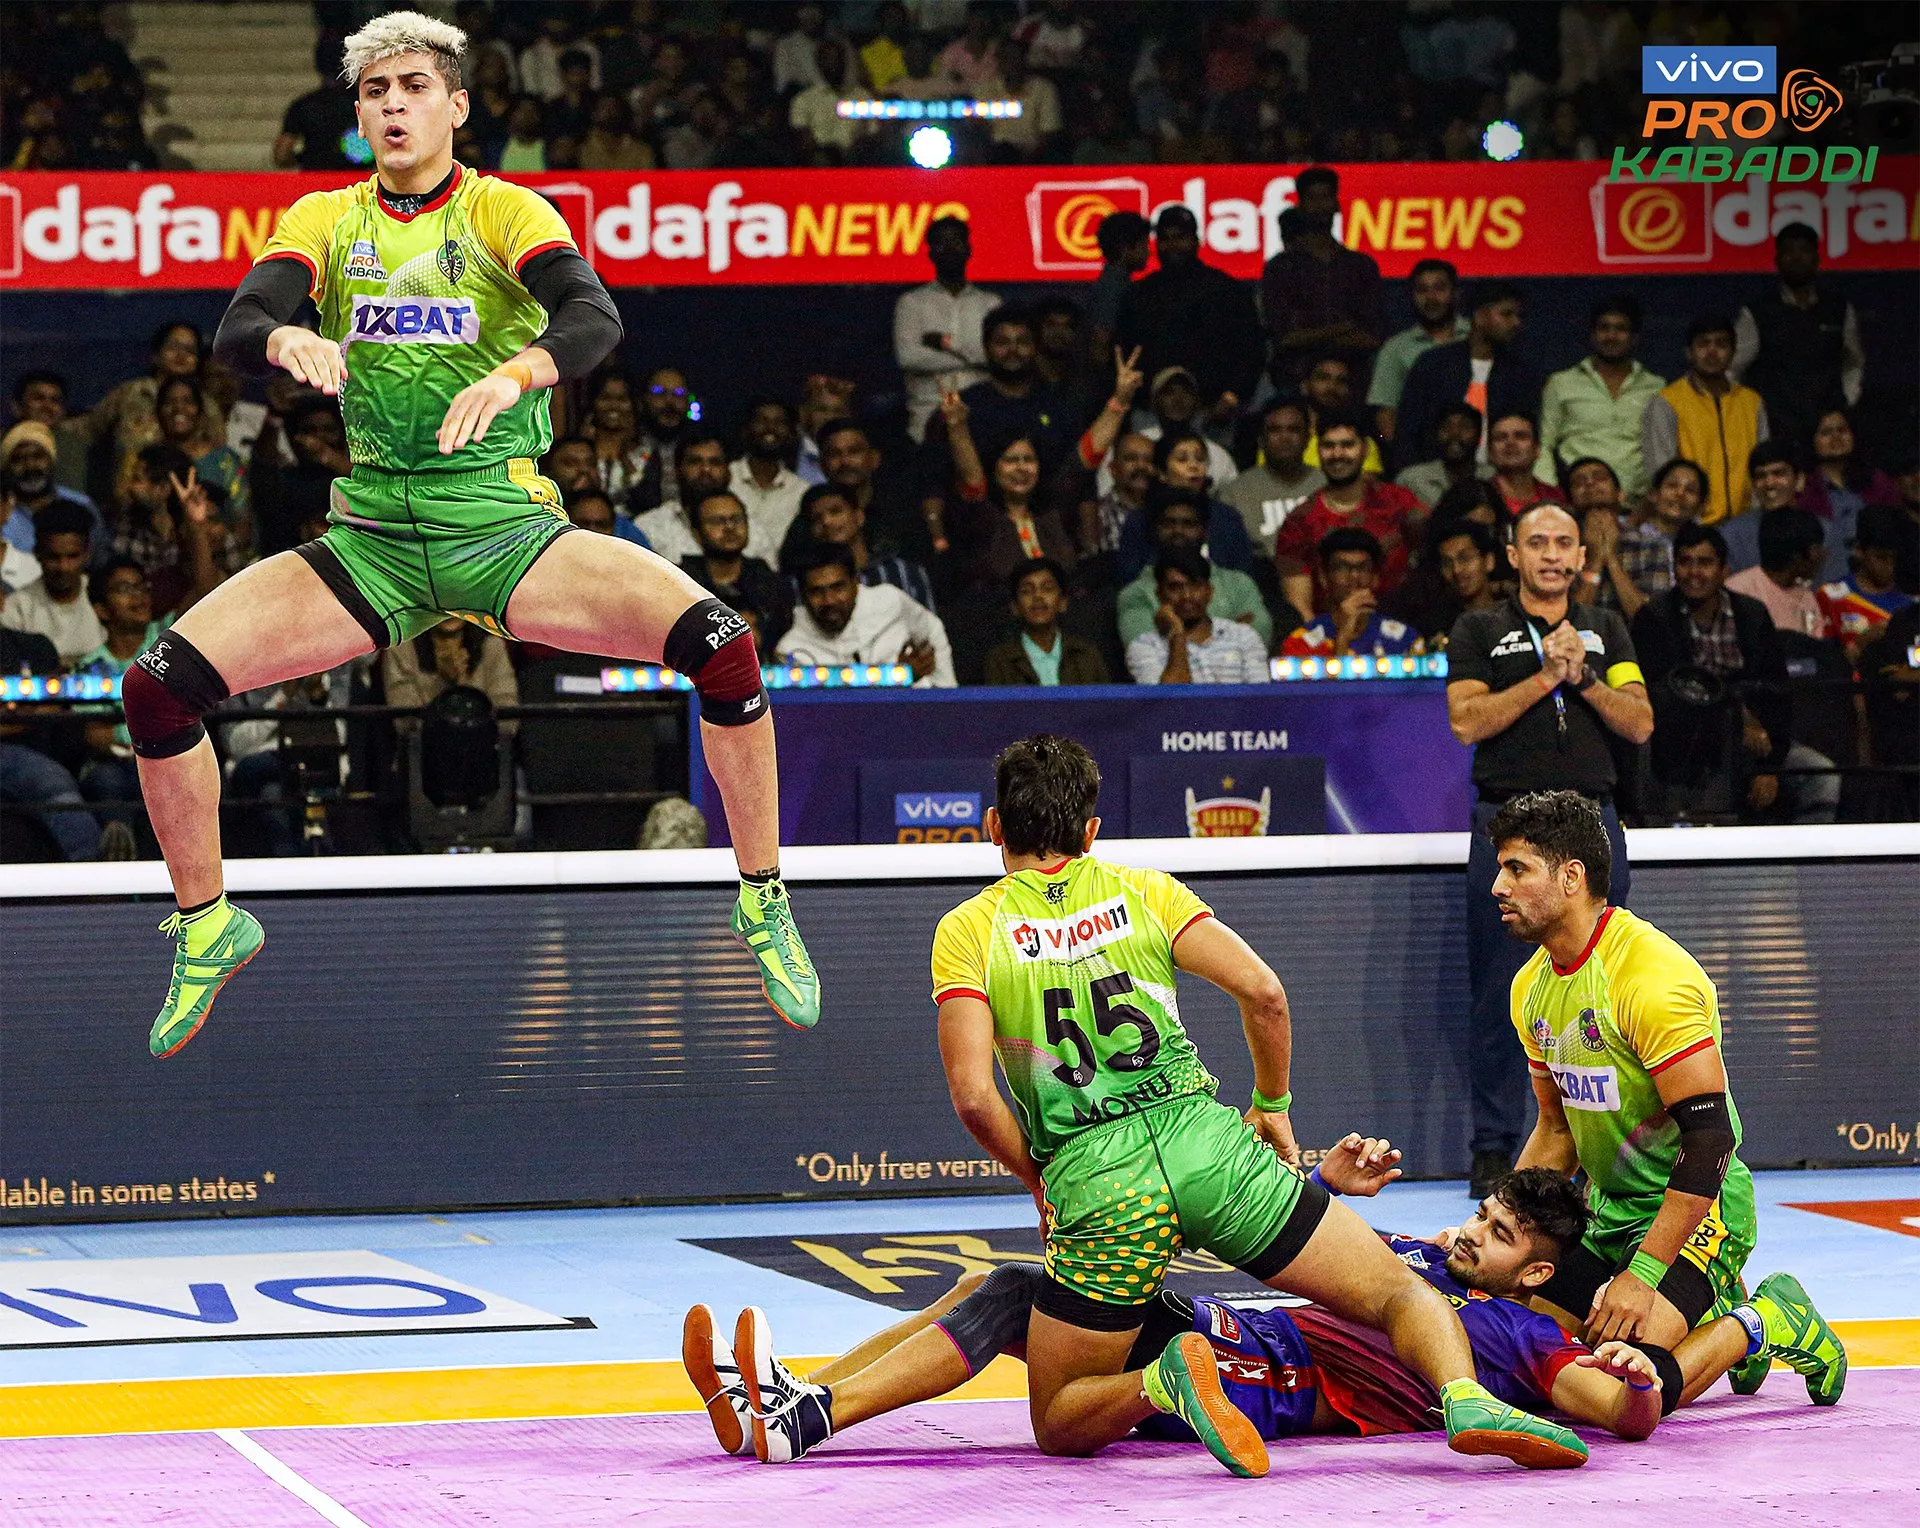 PKL | Patna Pirates' Mohammadreza Shadloui creates record for most tackle points in a match